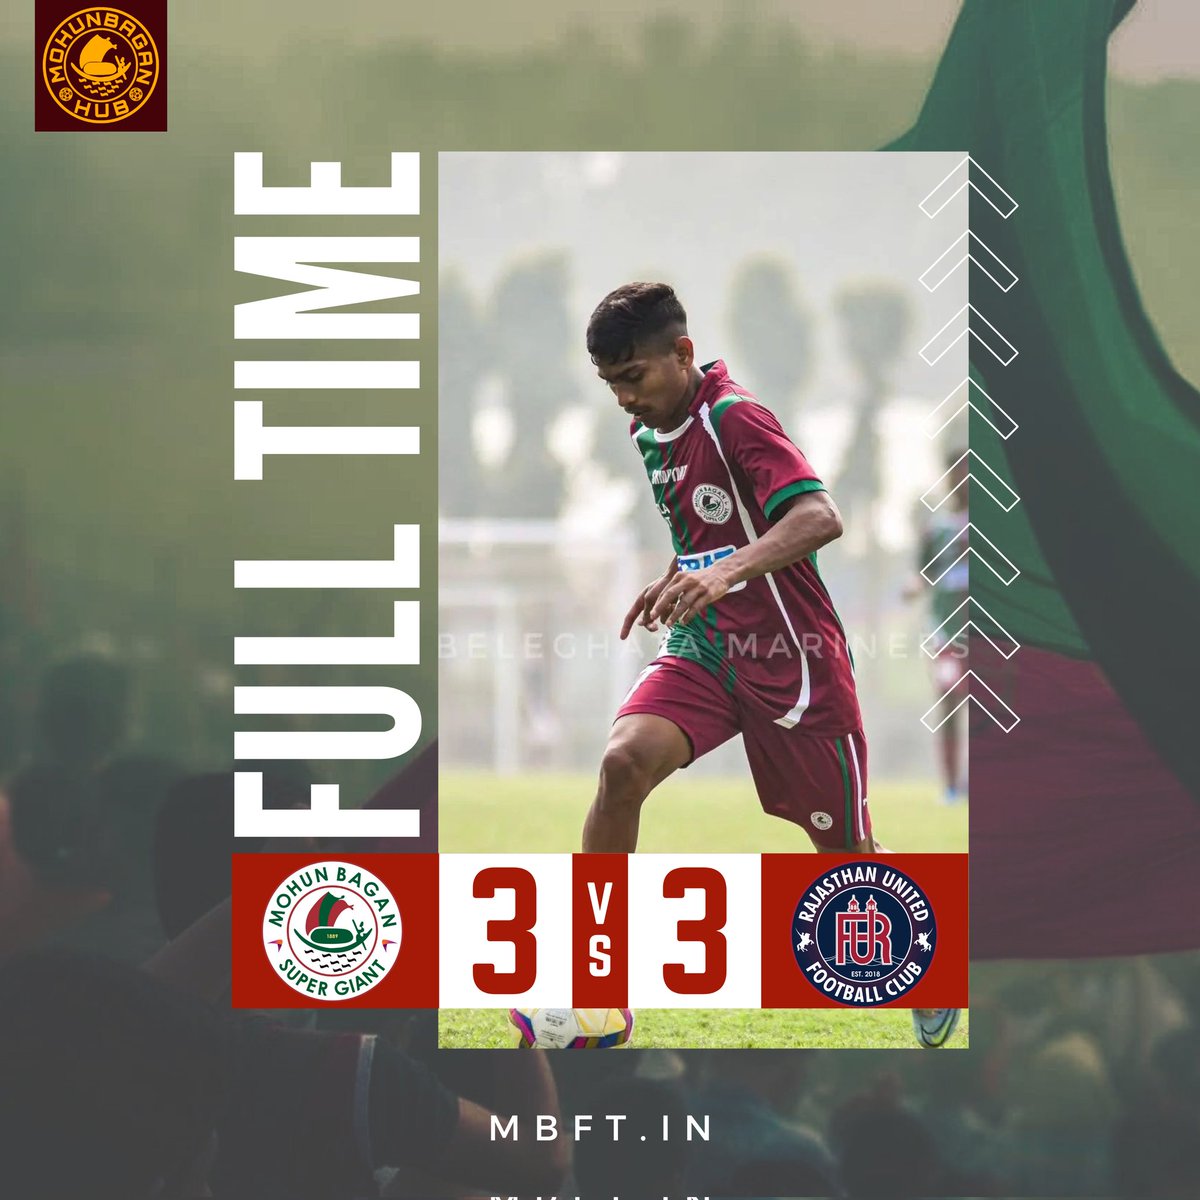 Mohun Bagan U-17 team has started their AIFF U-17 Youth League National Round campaign today with a draw We move on to our next game against Sudeva Delhi on 16th May